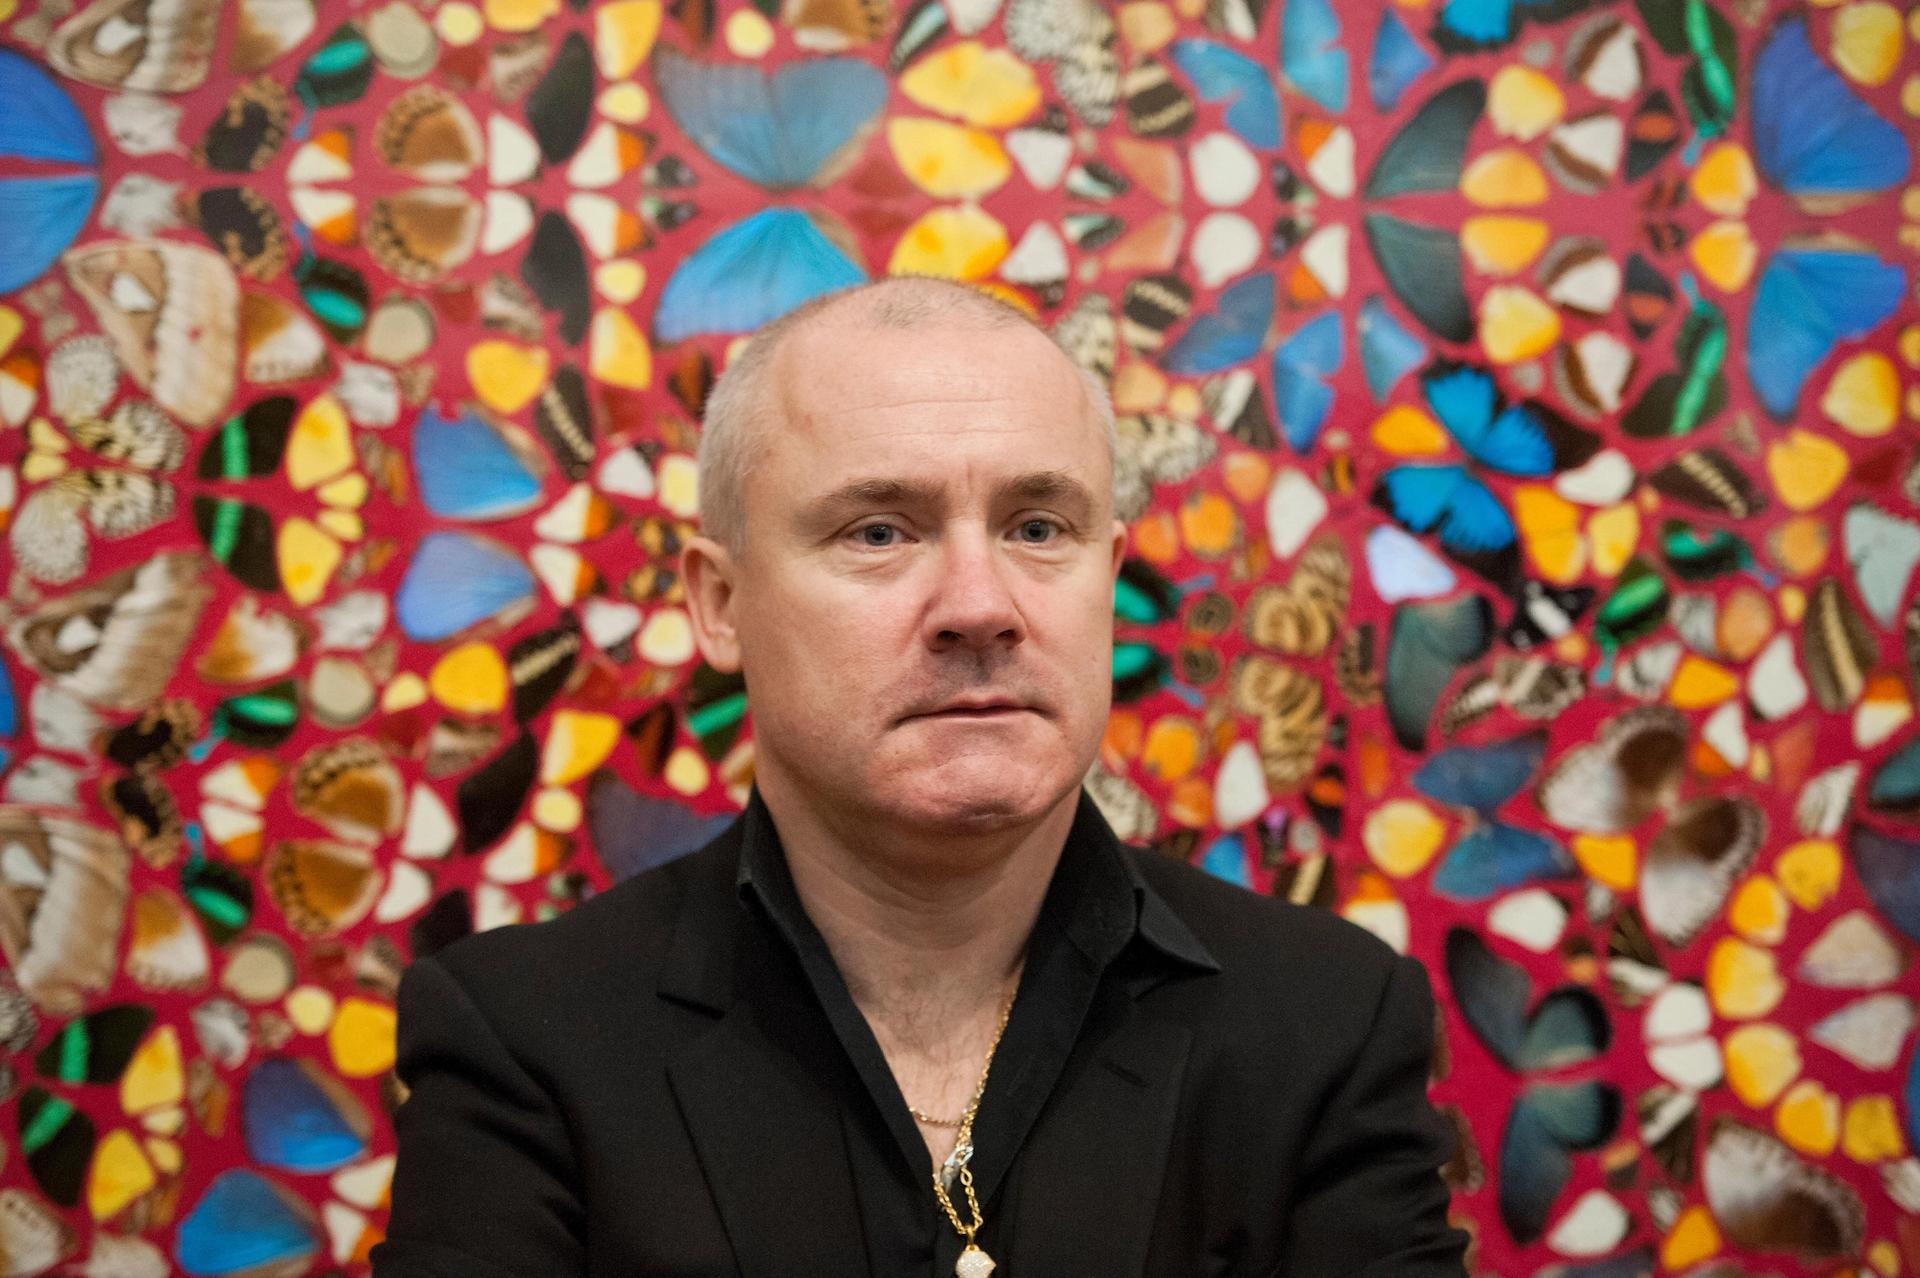 Damien Hirst has made his son, Connor, a director of Science (UK)

Guy Bell/Alamy Stock Photo